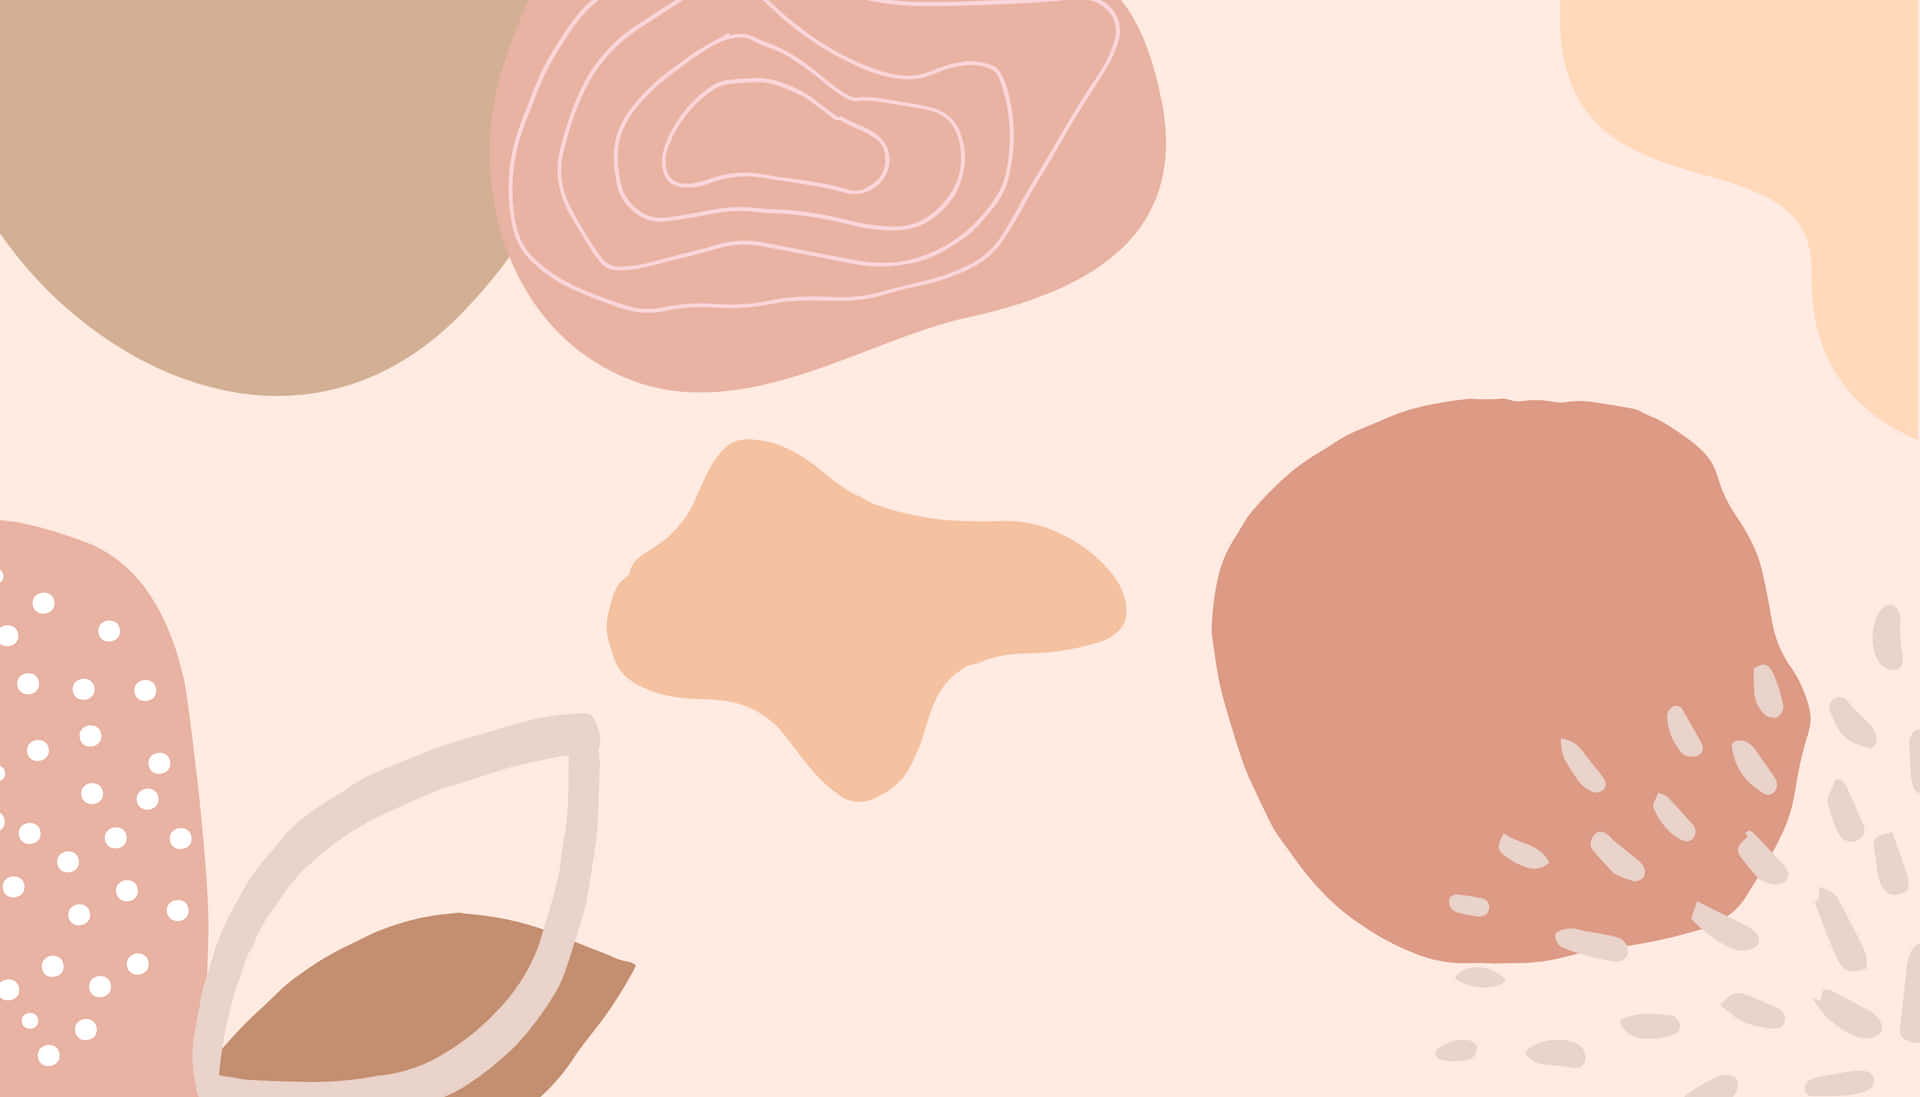 A pattern of abstract shapes in pink and beige - Abstract, terracotta